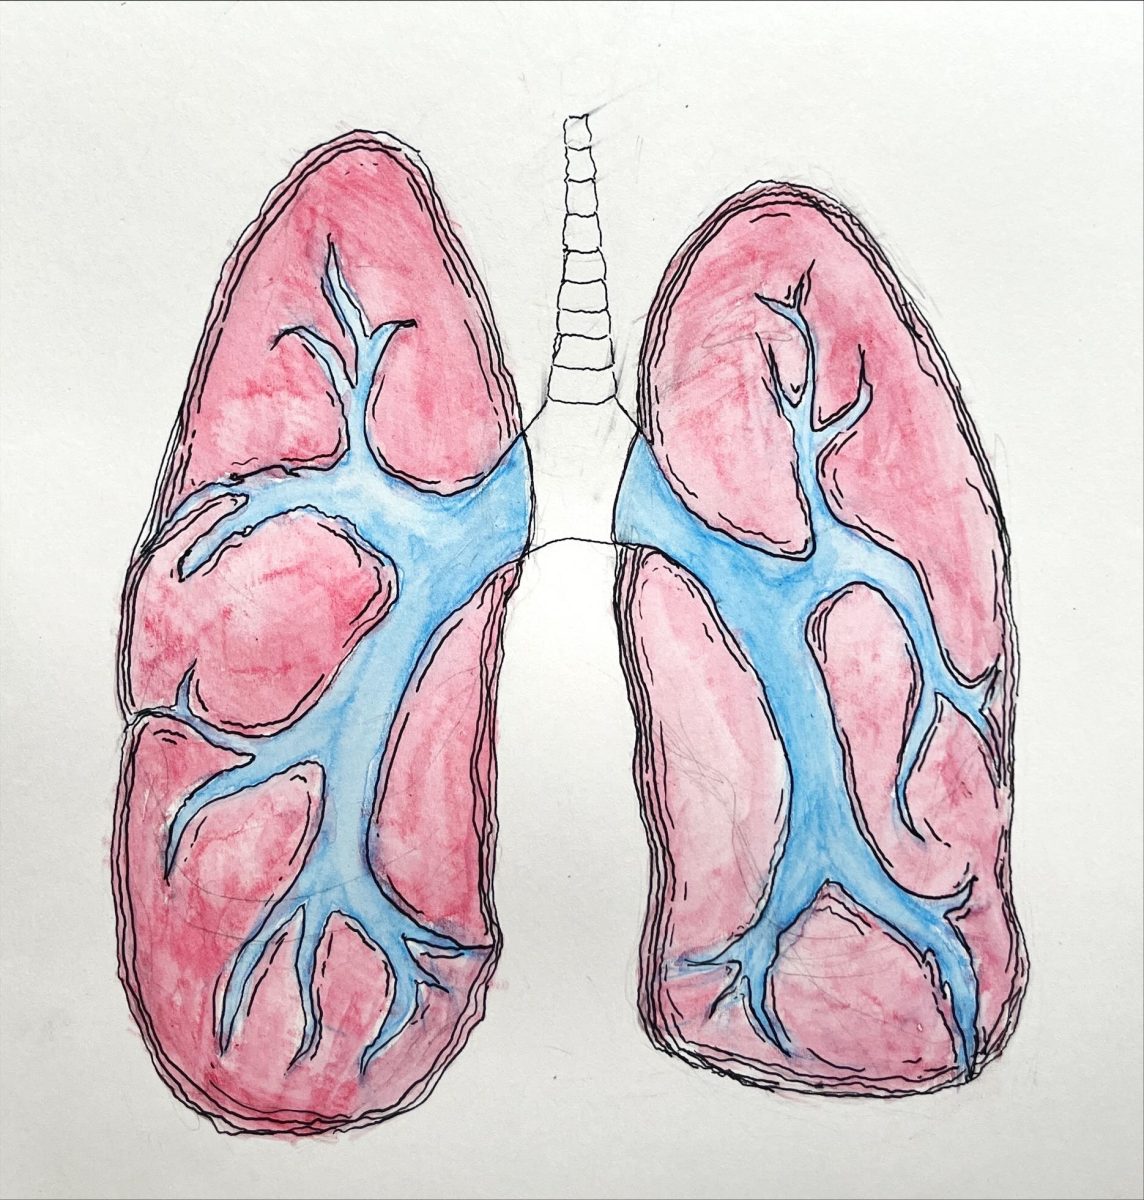 A+pair+of+lungs+display+bright%2C+blue+veins.+Asbestos+was+recently+banned+by+the+Environmental+Protection+Agency%2C+and+the+ban+is+a+step+in+the+right+direction+for+American+public+health.+%28Gabriel+Fiorini+%7C+Northern+Star%29